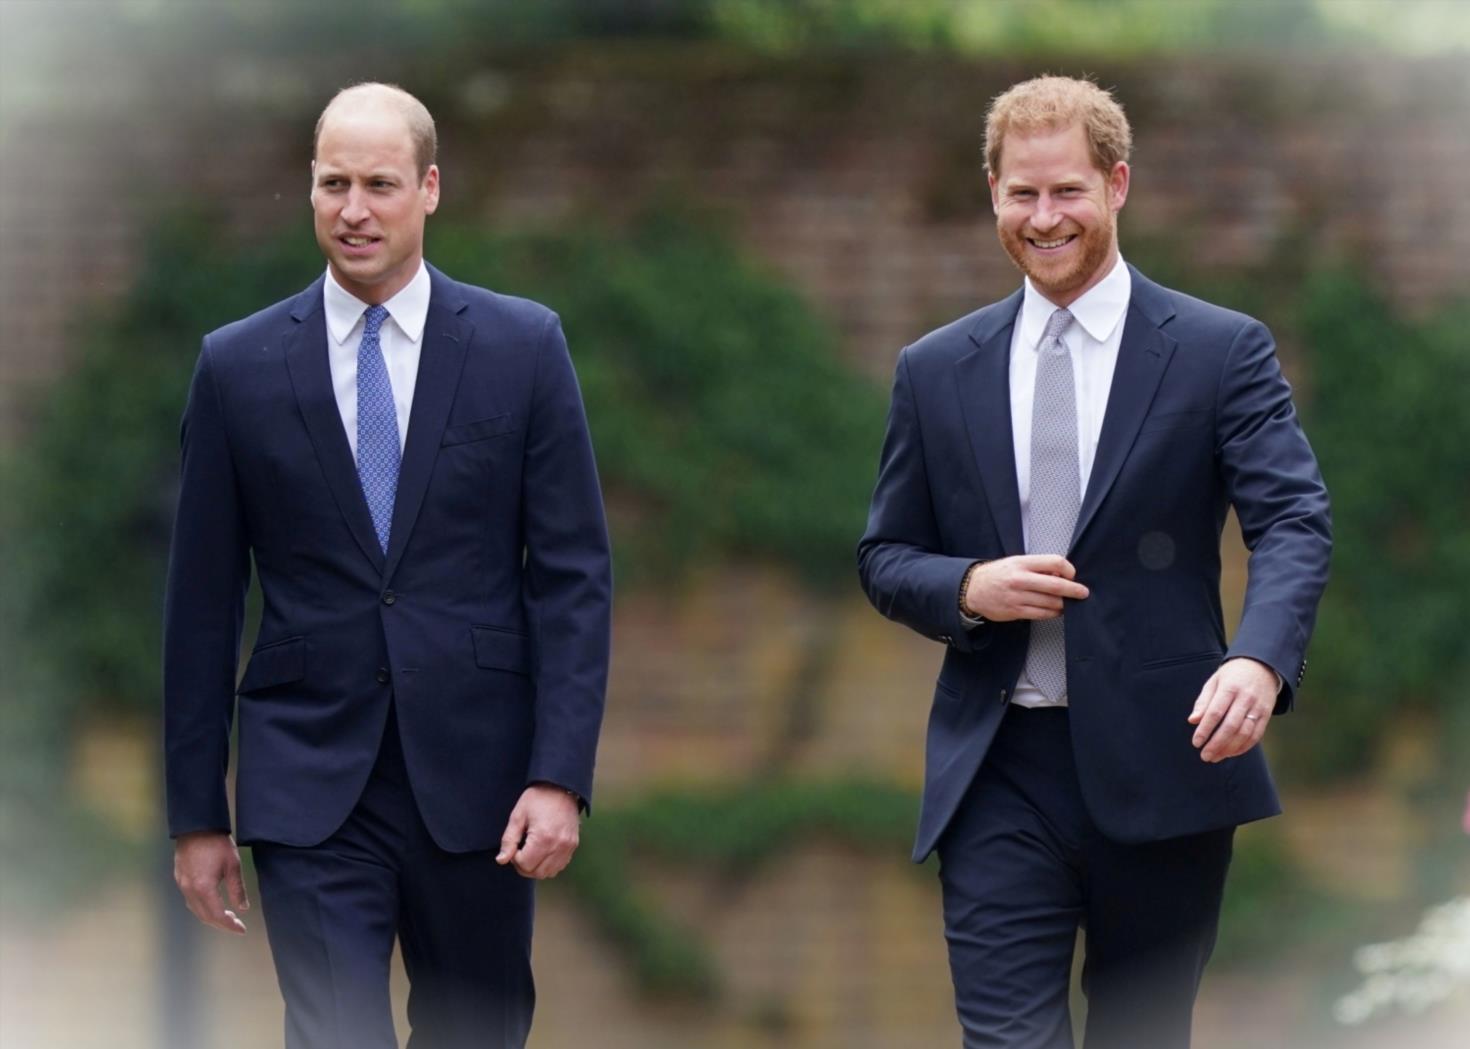 Prince Harry Allowed to Serve in War While Prince William Denied DueDySXbnDWZ 4